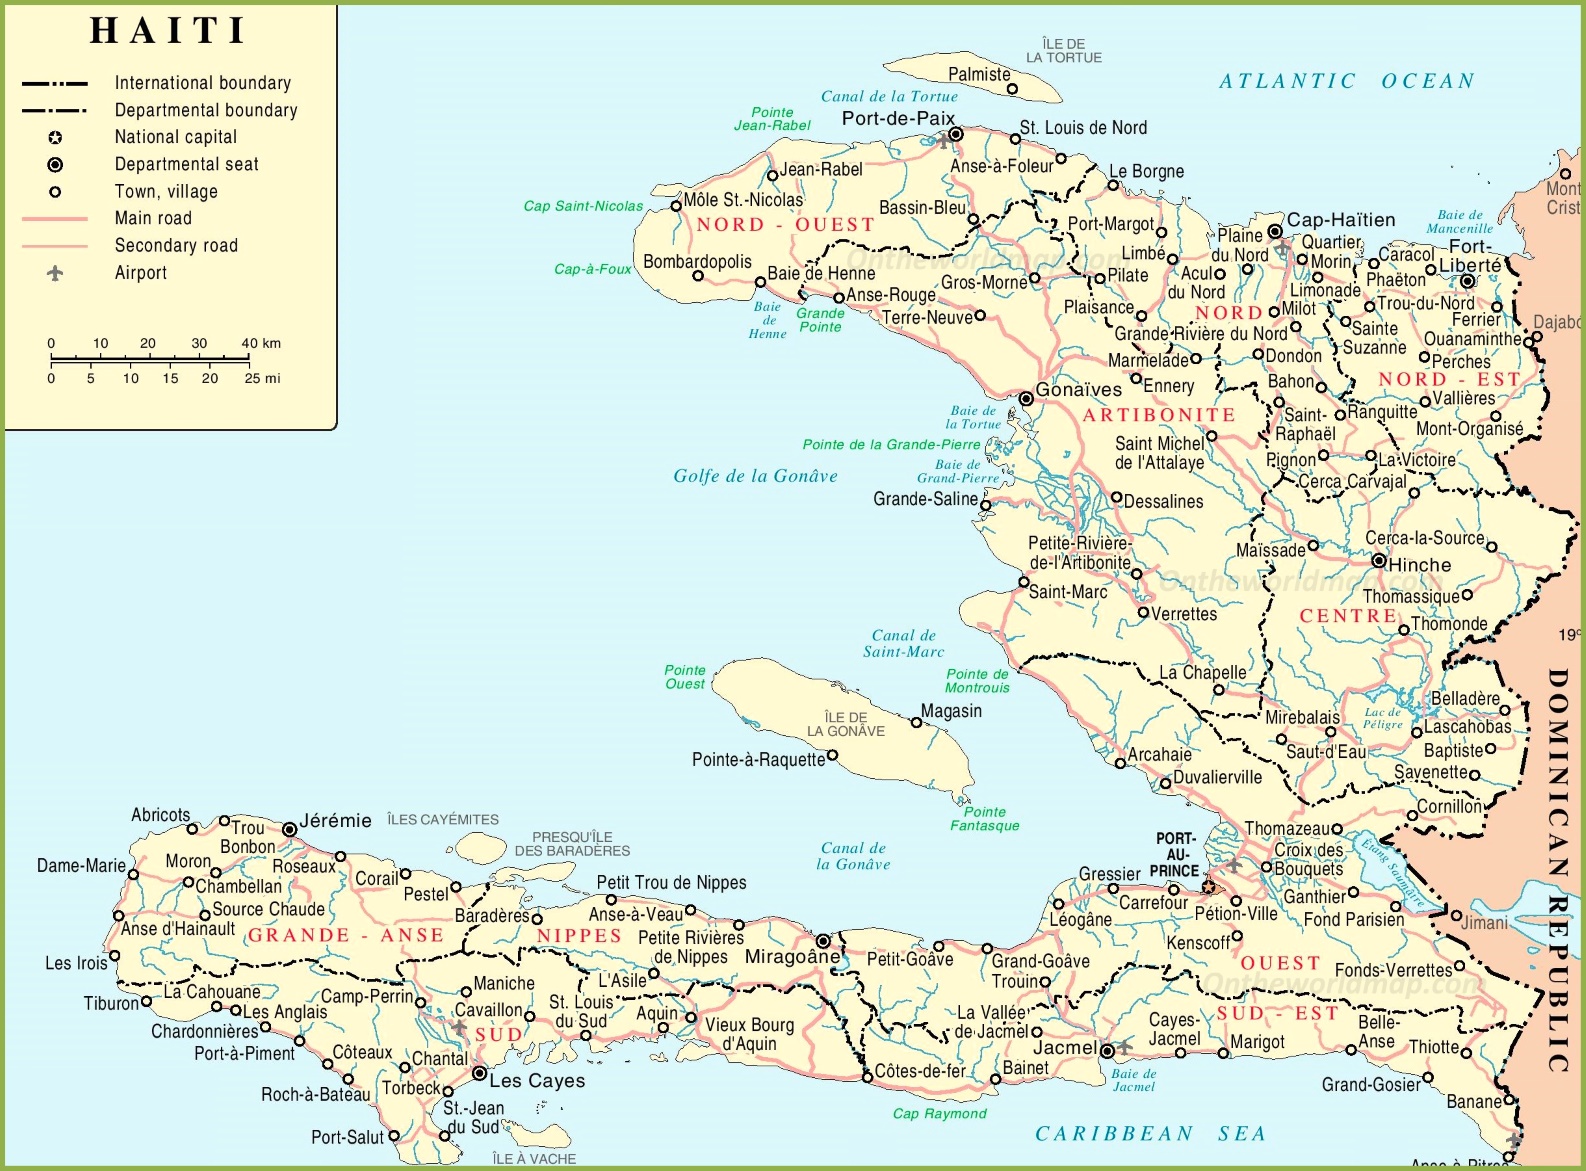 world-maps-library-complete-resources-maps-haiti